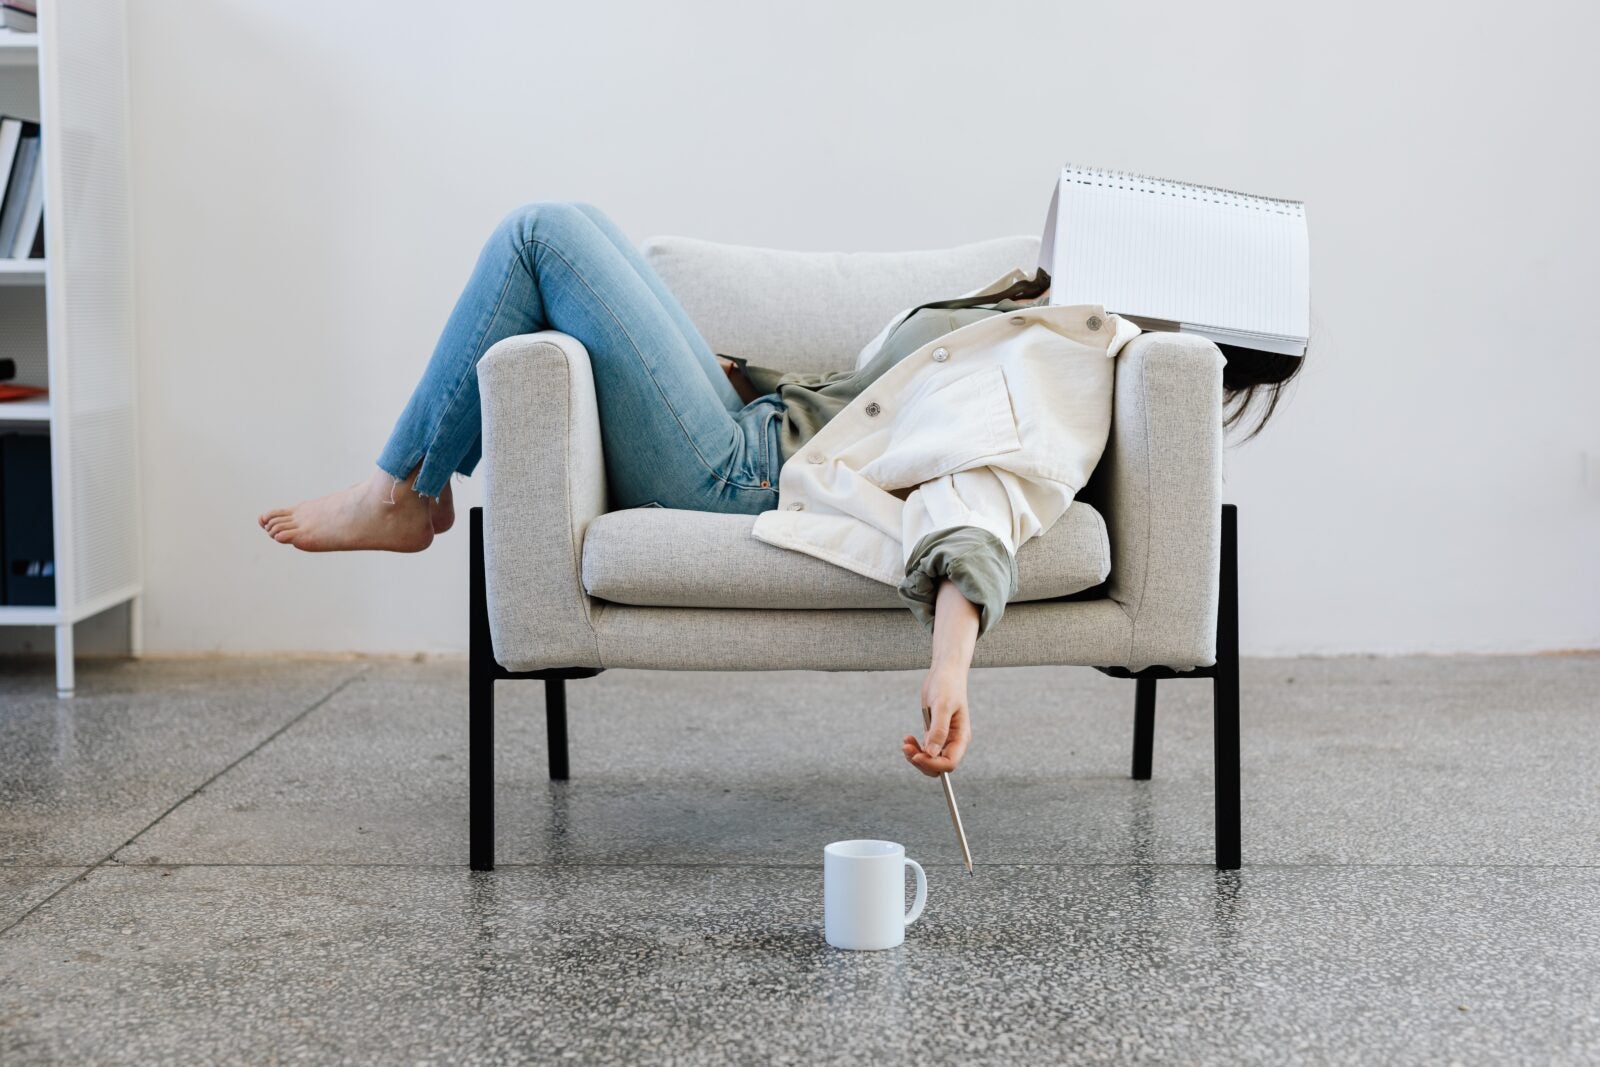 A woman laying on a one-seater sofa with her legs hanging off the armrest and a book covering her face. Her hands hang on the front of the sofa while holding a pencil and a cup is on the floor nearby.